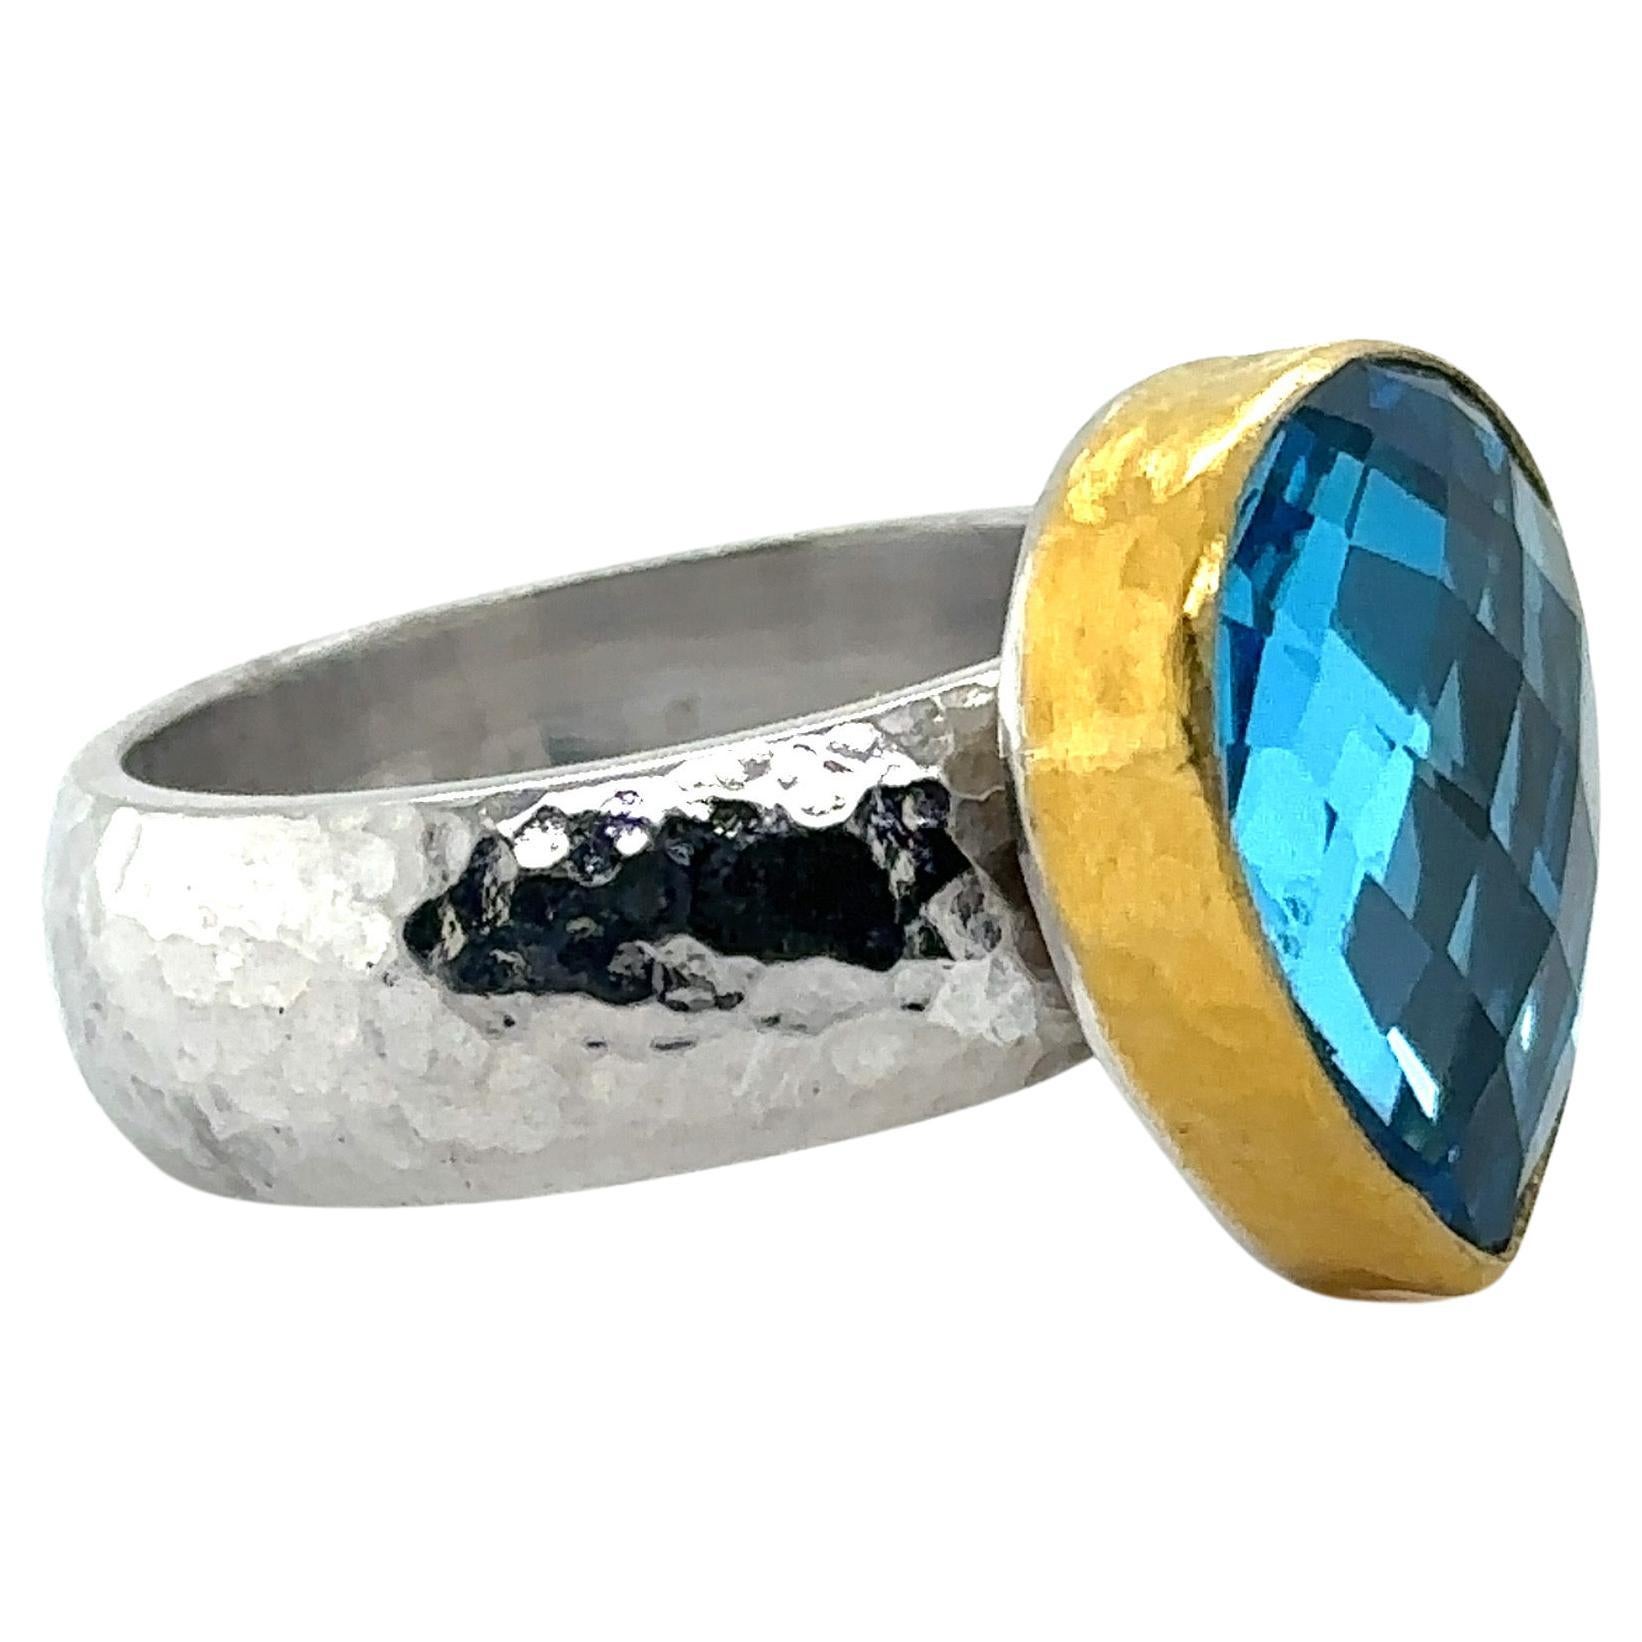 JAS-19-1918 - 24KT GOLD/SS RING with PEAR SHAPE SWISS BLUE TOPAZ For Sale